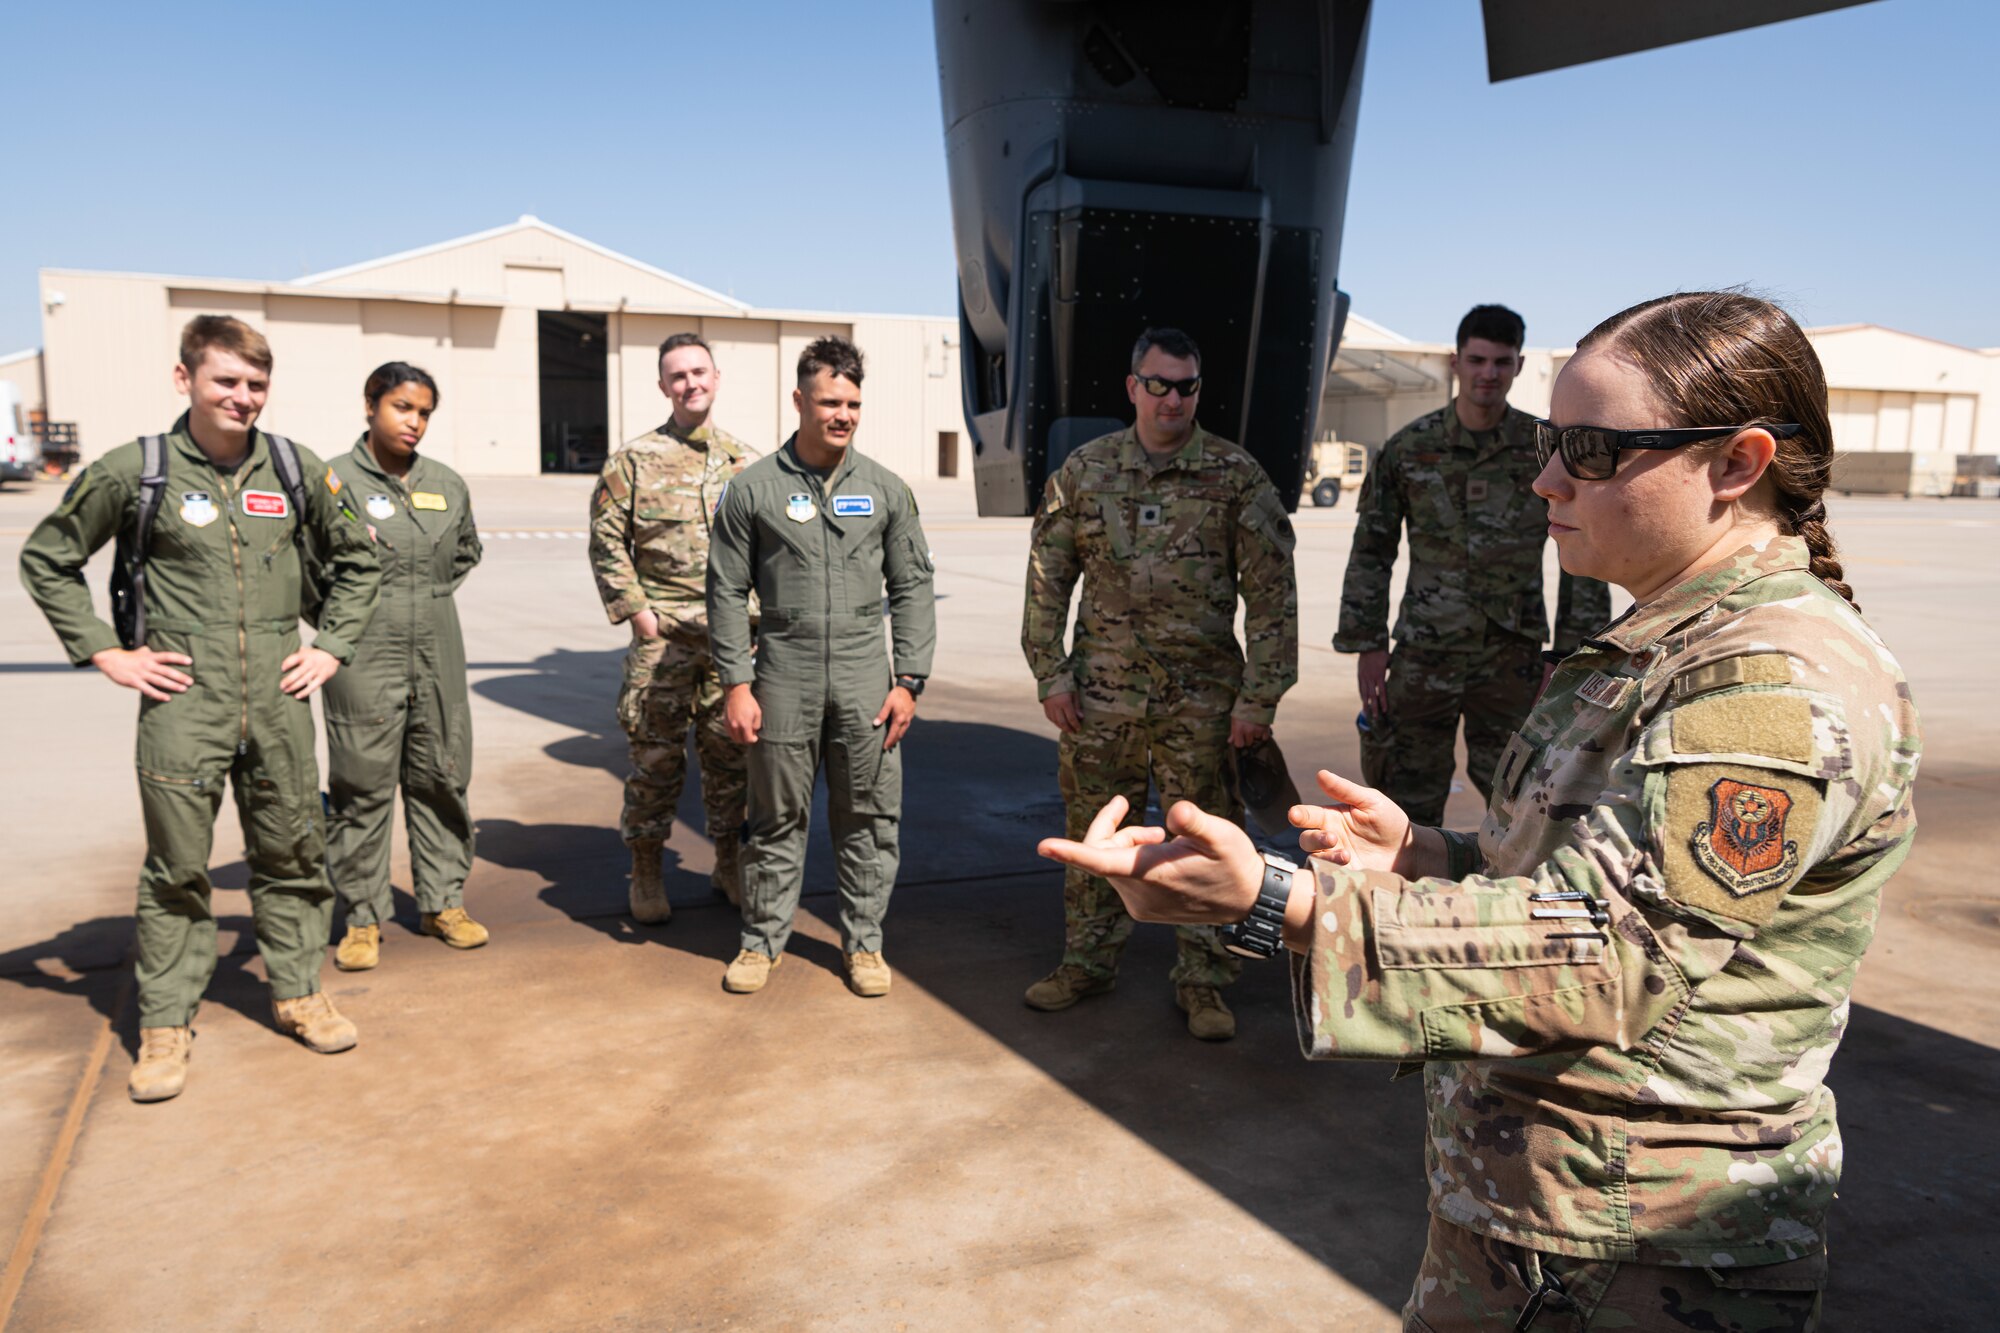 Airmen surround an Air Force officer giving a briefing on a flight line.